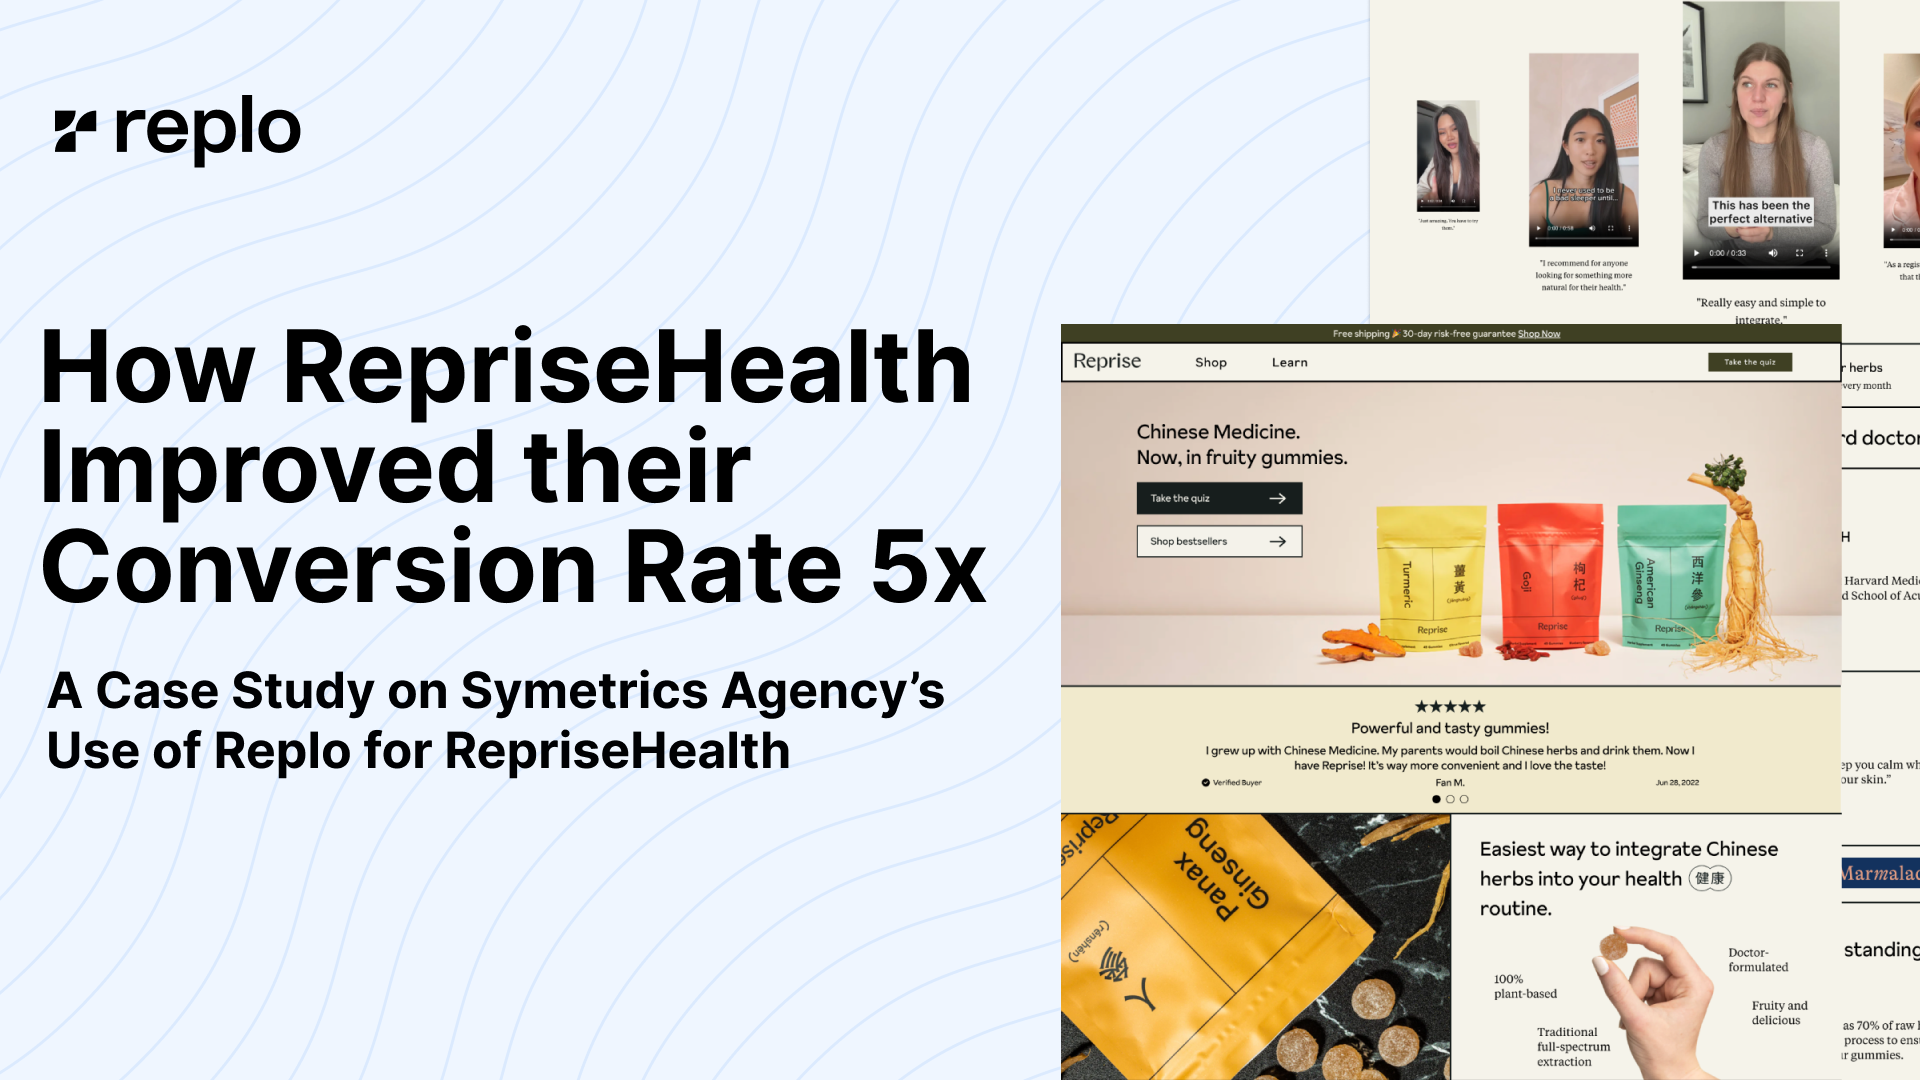 How RepriseHealth Improved their Conversion Rate 5x with Replo